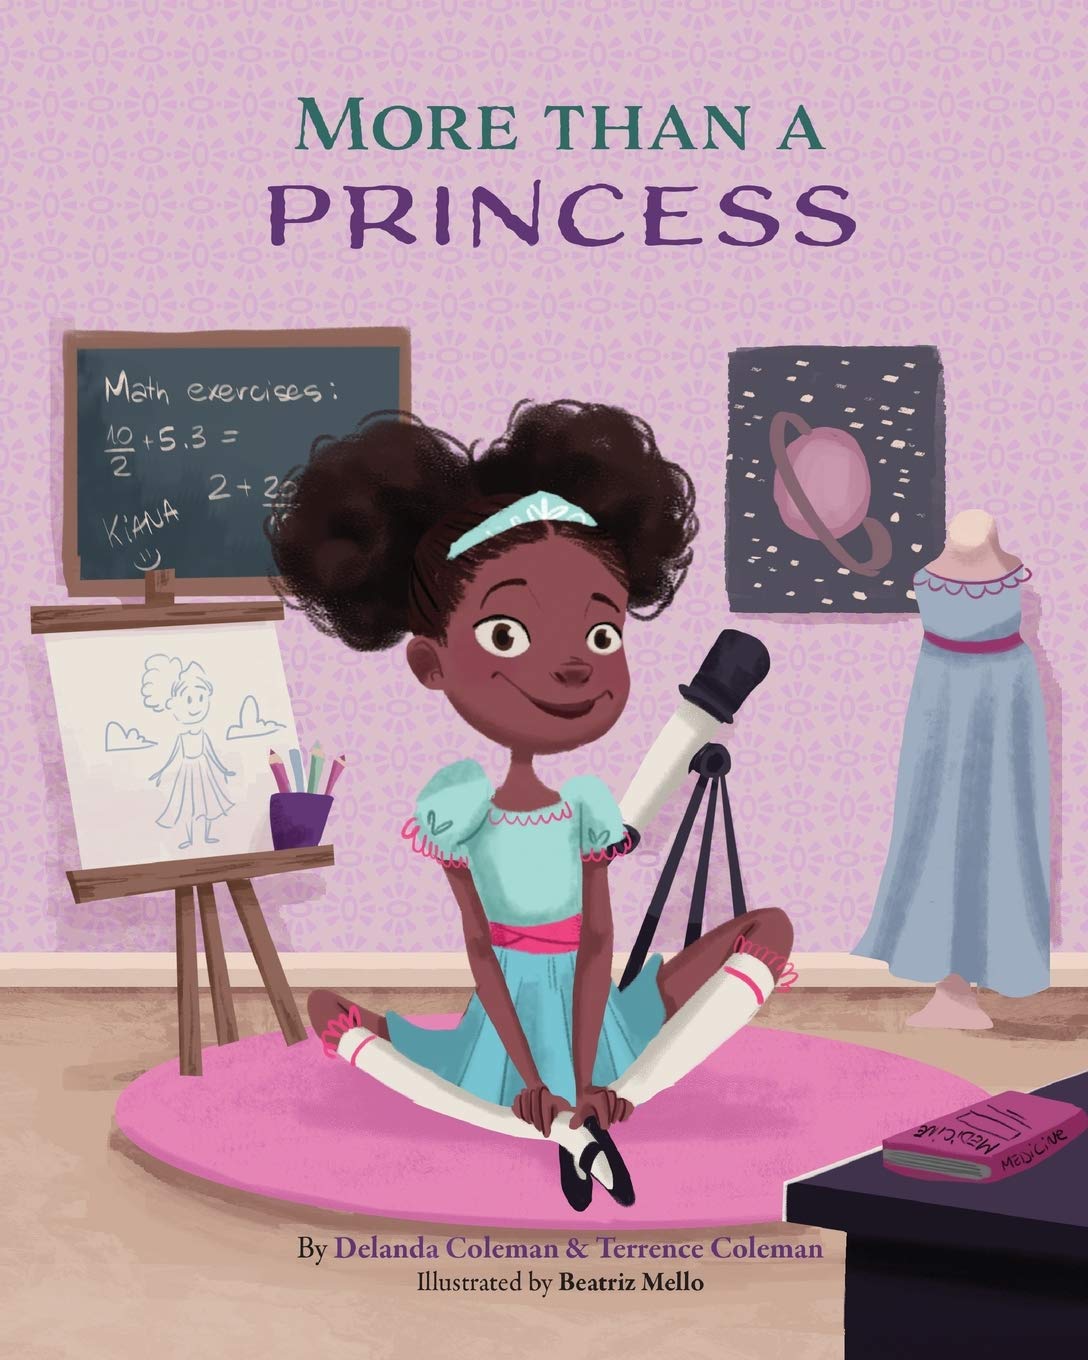 SCIENCE: More Than a Princess – An Inspirational Collection of Books, Activities, and Notebooks by Delanda and Terrence Coleman (Sydney & Coleman)